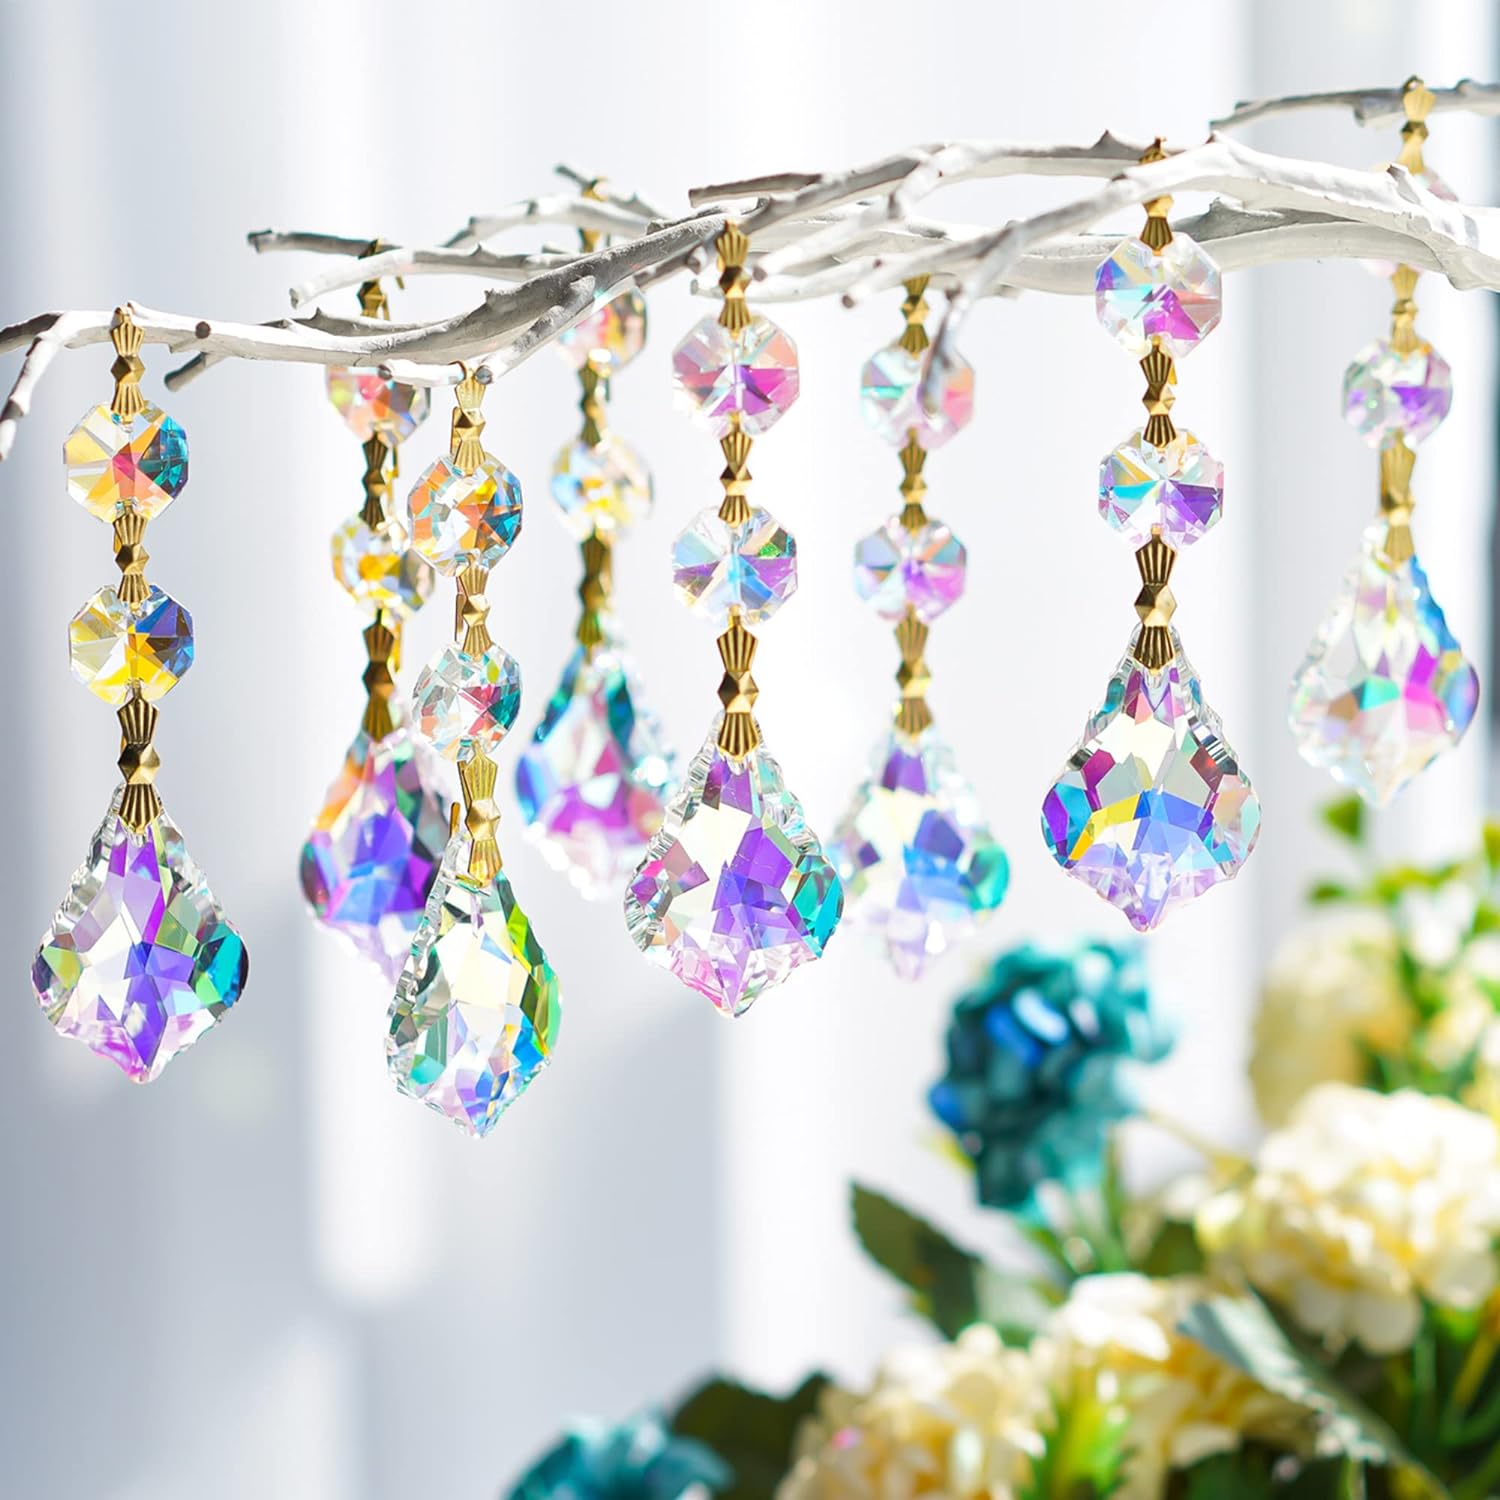 30-Pack Hanging Crystals for Centerpieces Crystal Garland Strands